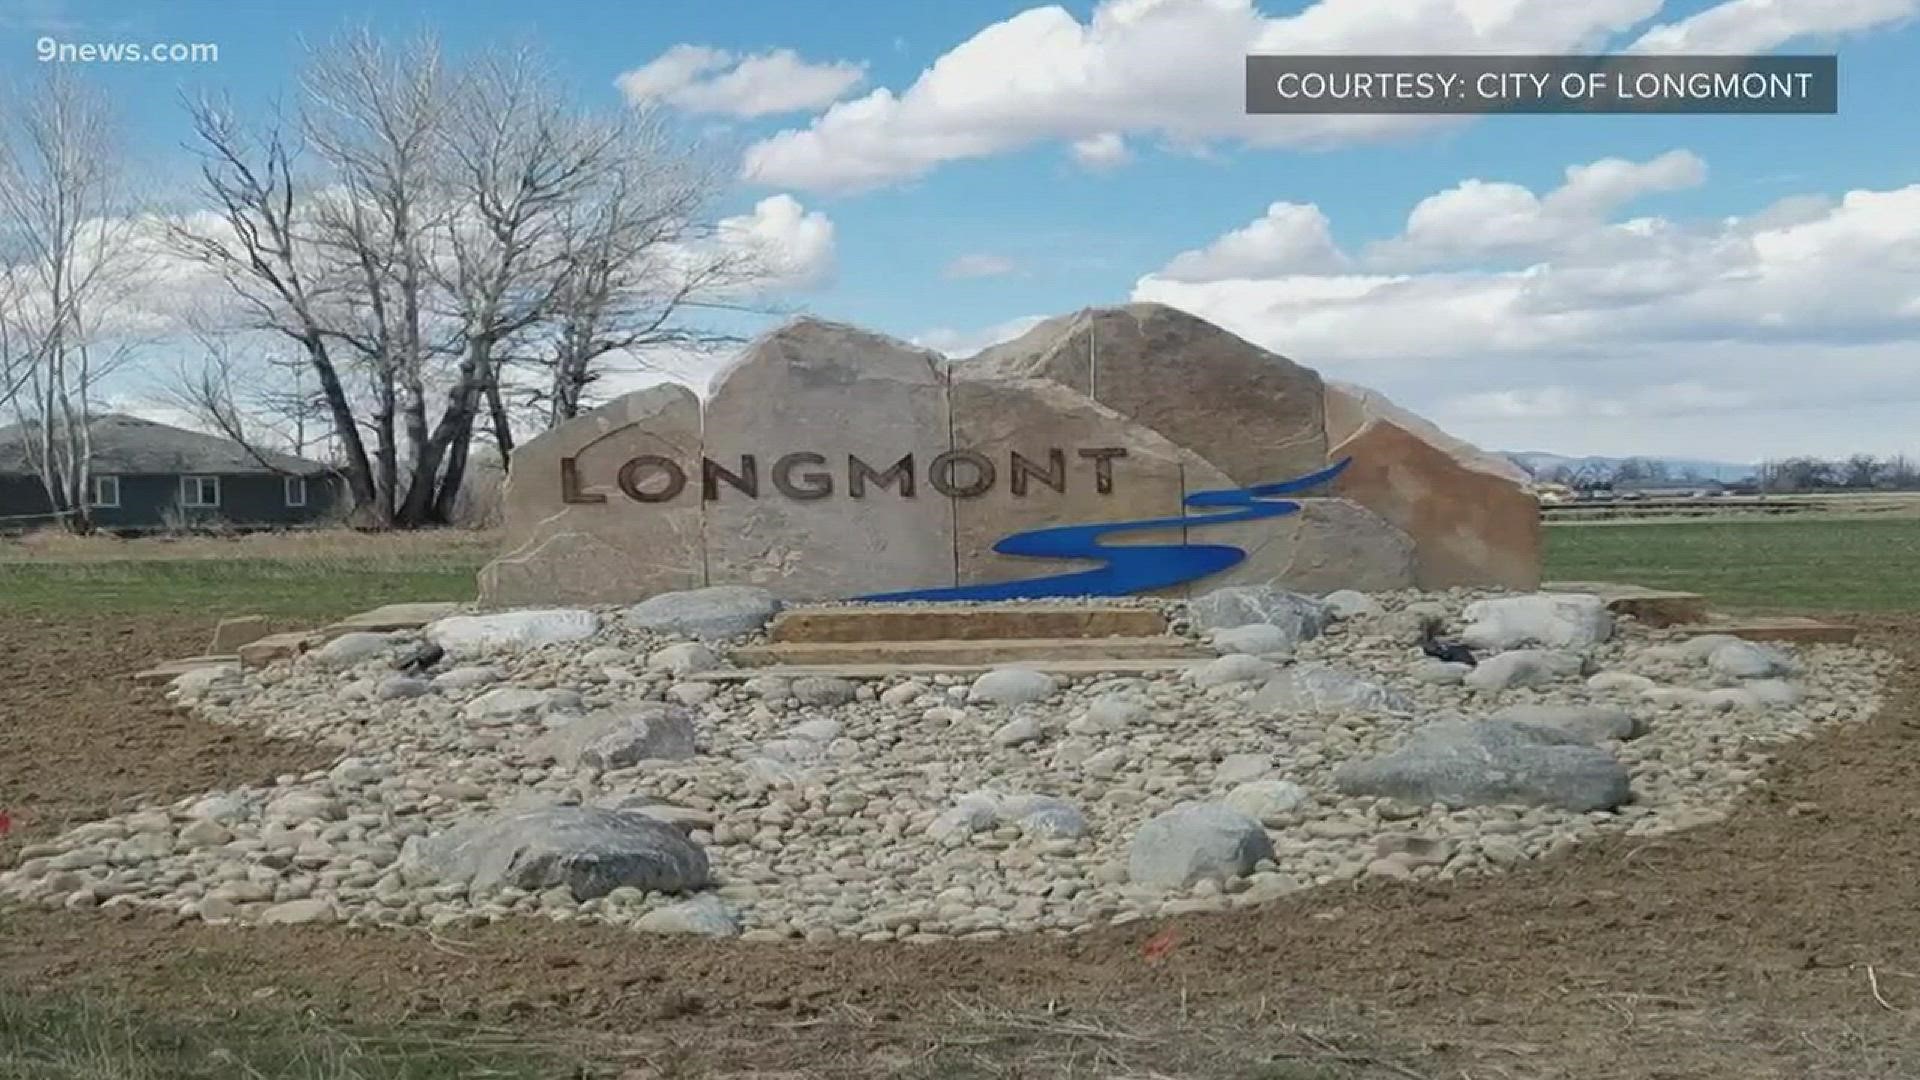 Longmont installed a new welcome sign that's designed to include local landmarks, as well as the Colorado town’s history.